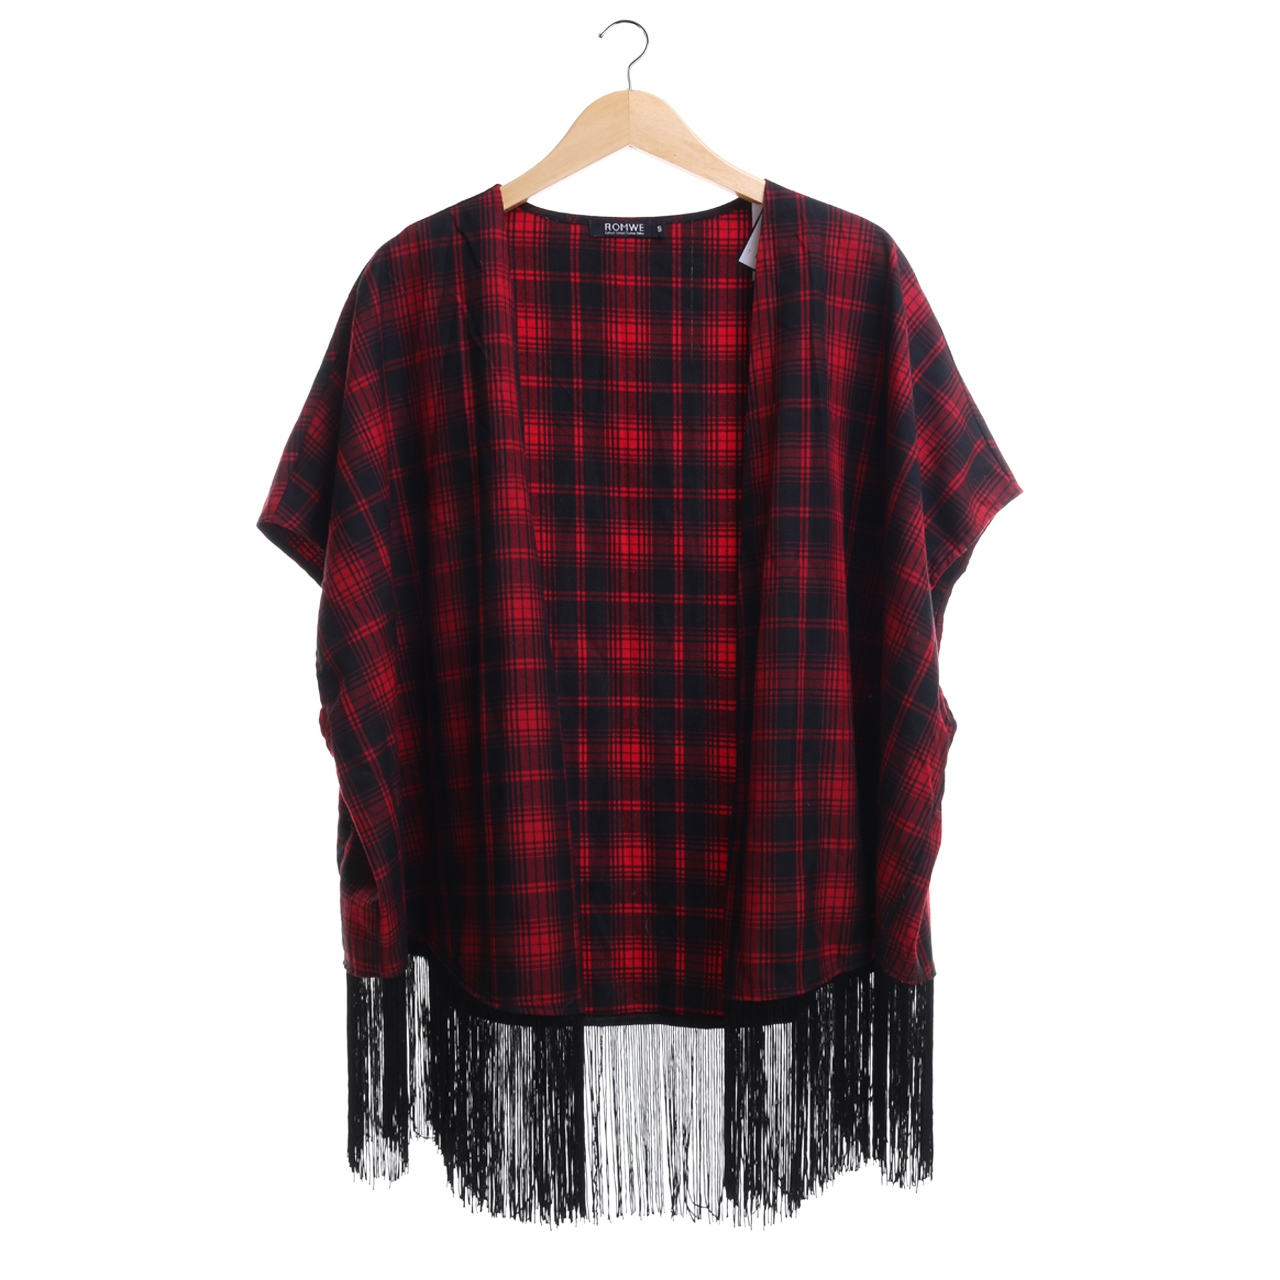 Romwe Red Plaid Fringe Outerwear